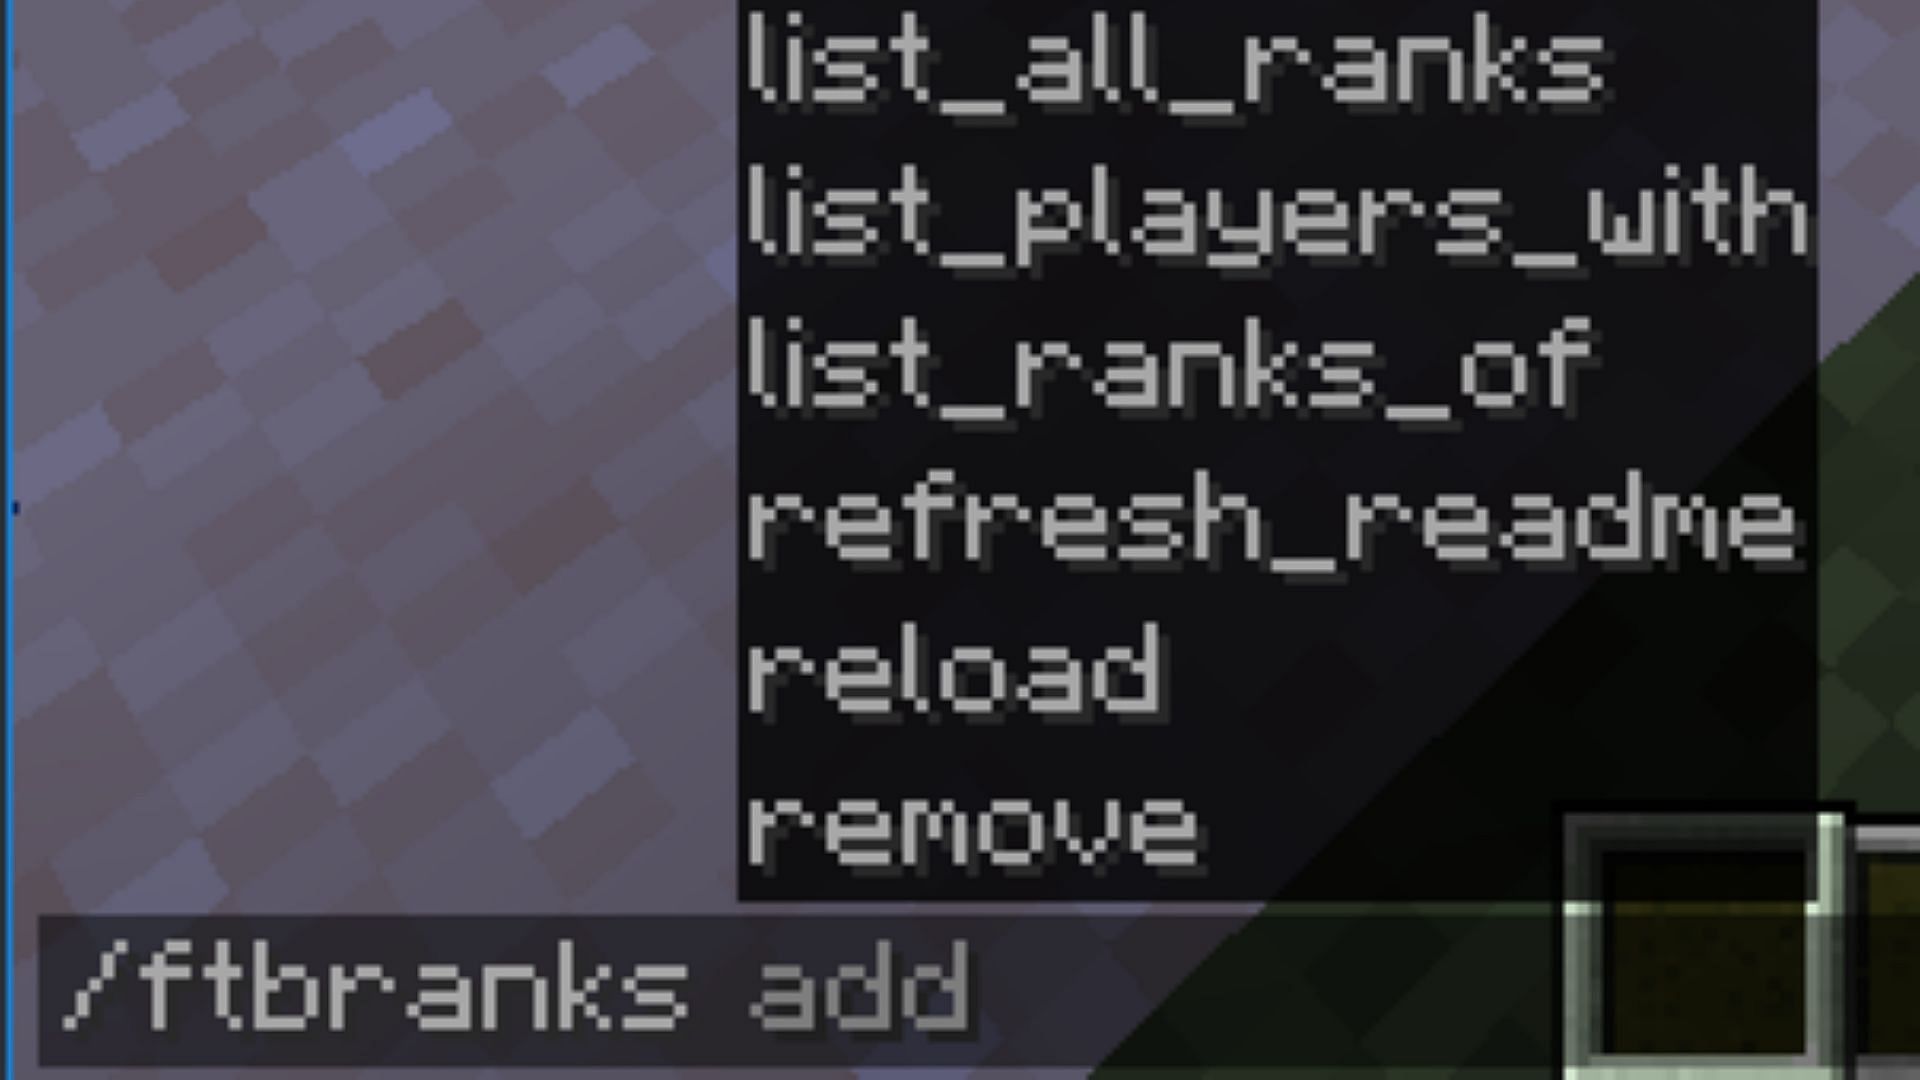 This mod adds different ranks that can be given to players in a Minecraft server (Image via CurseForge)